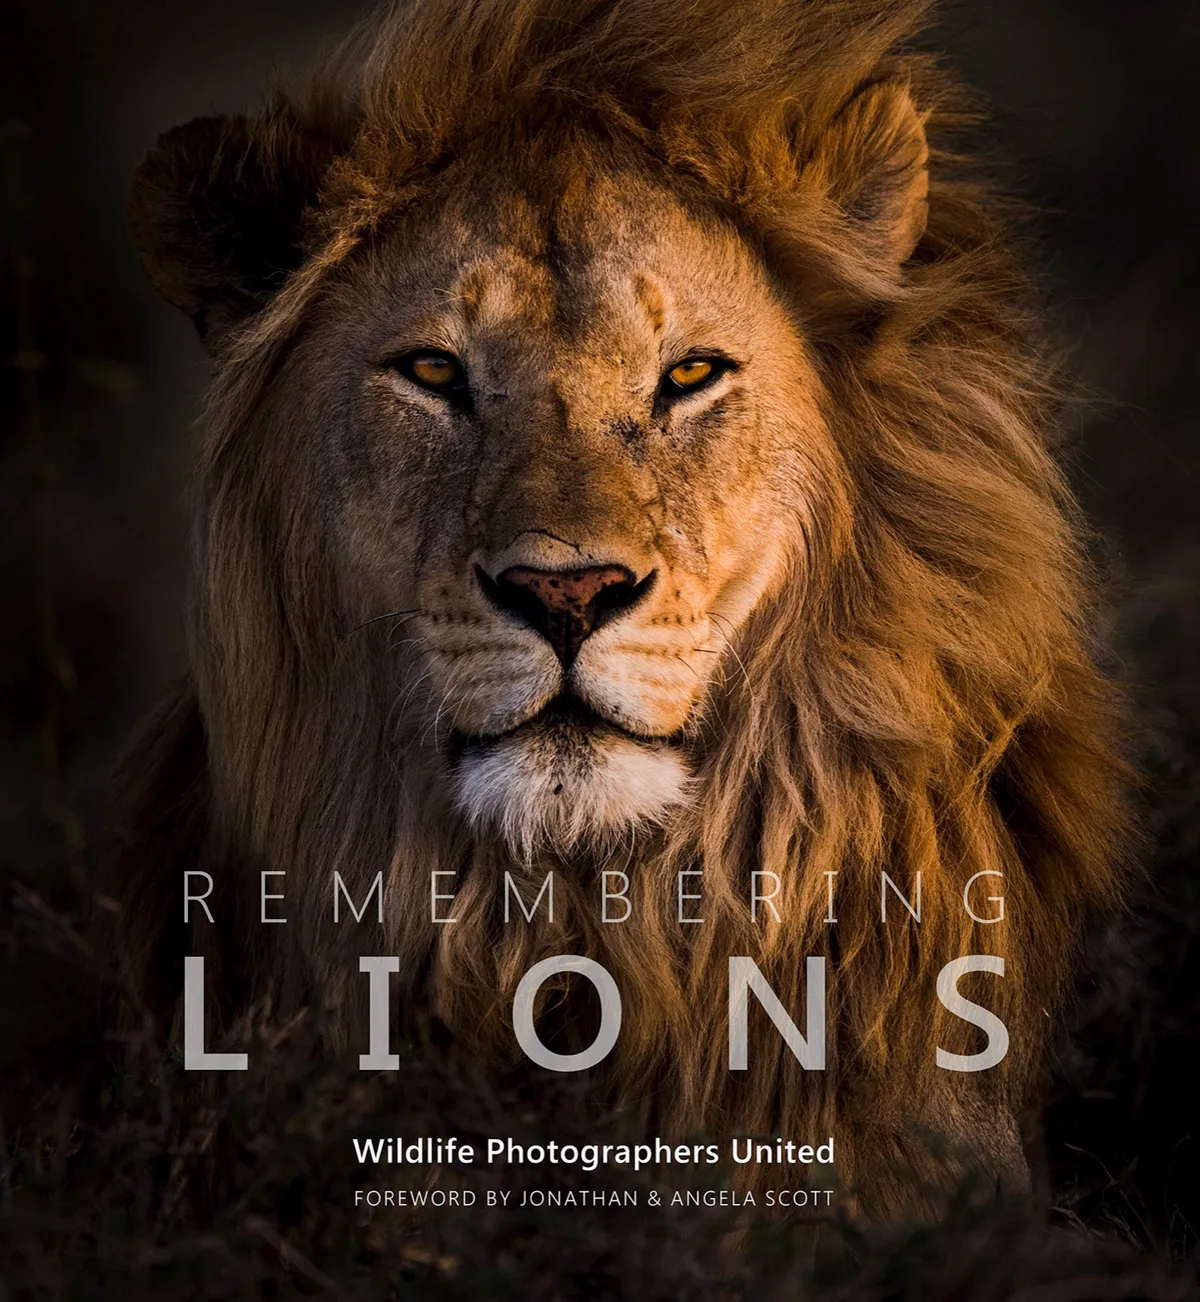 Remembering Lions book is published by Envisage Books.